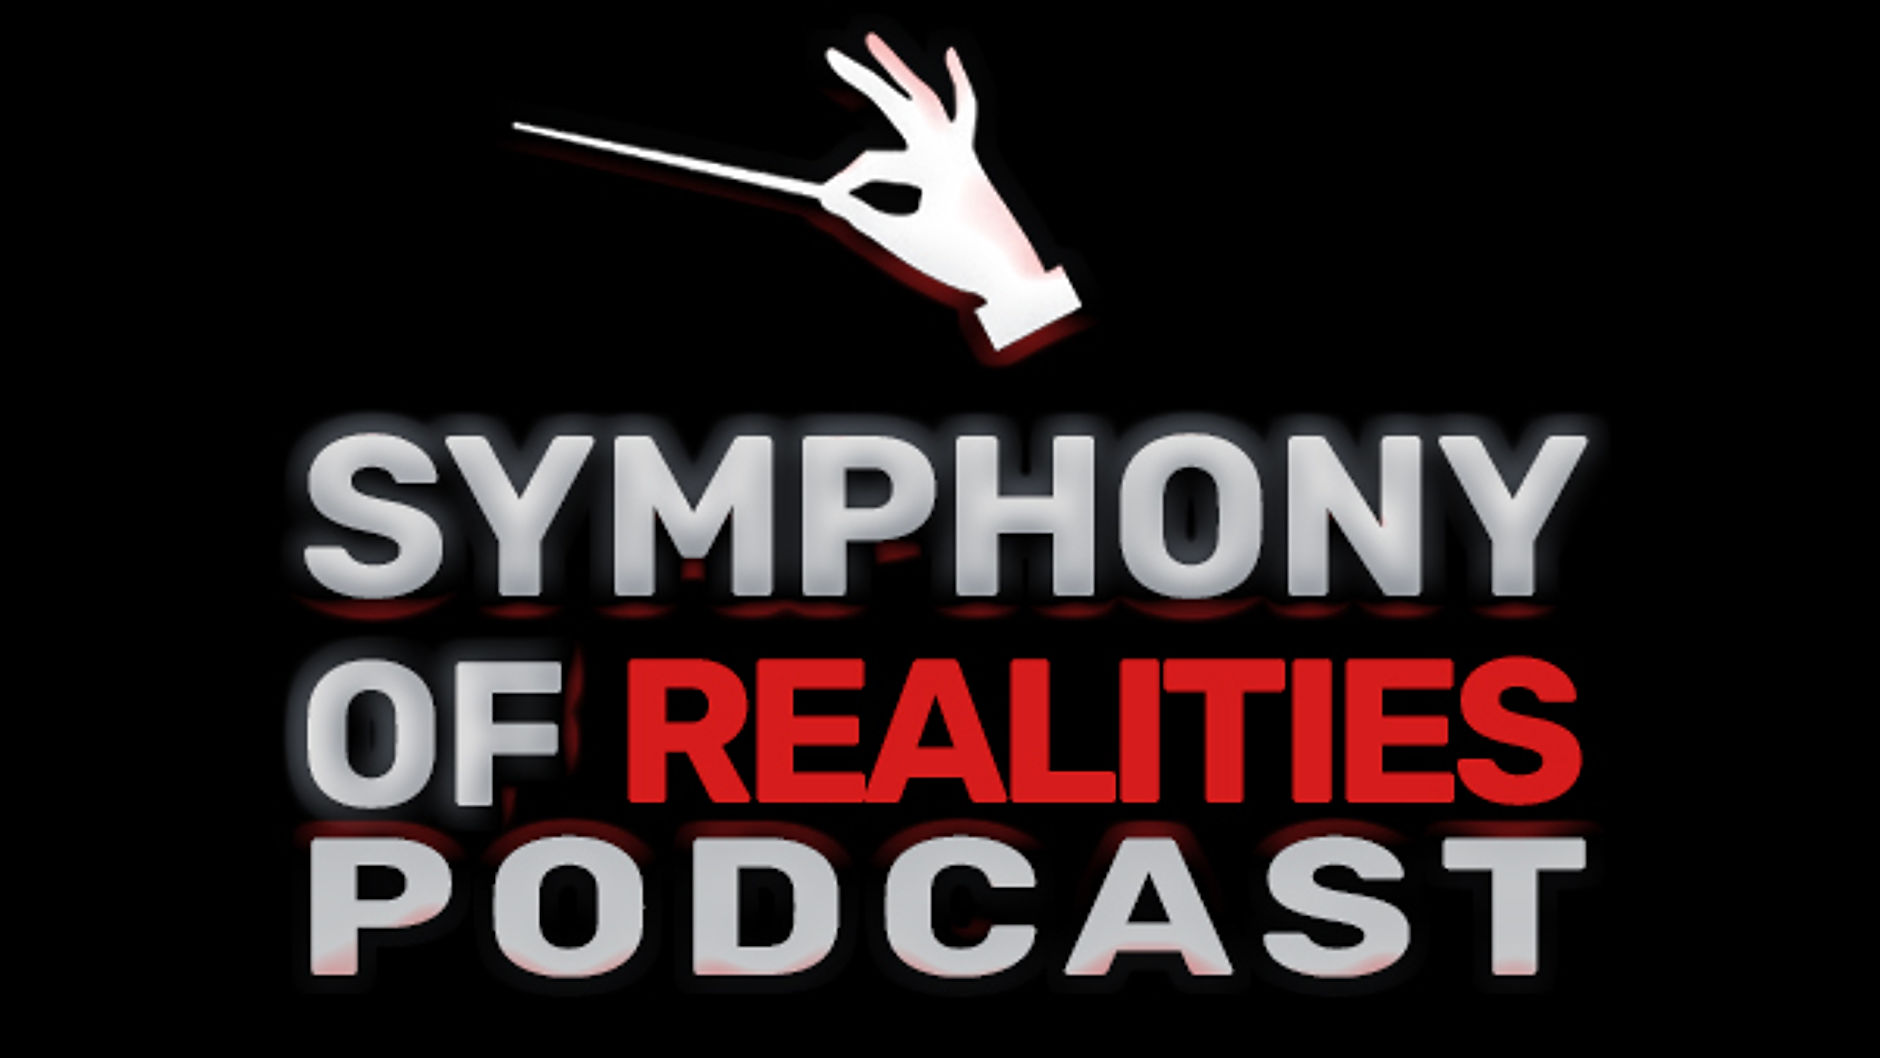 Symphony of Realities Podcast